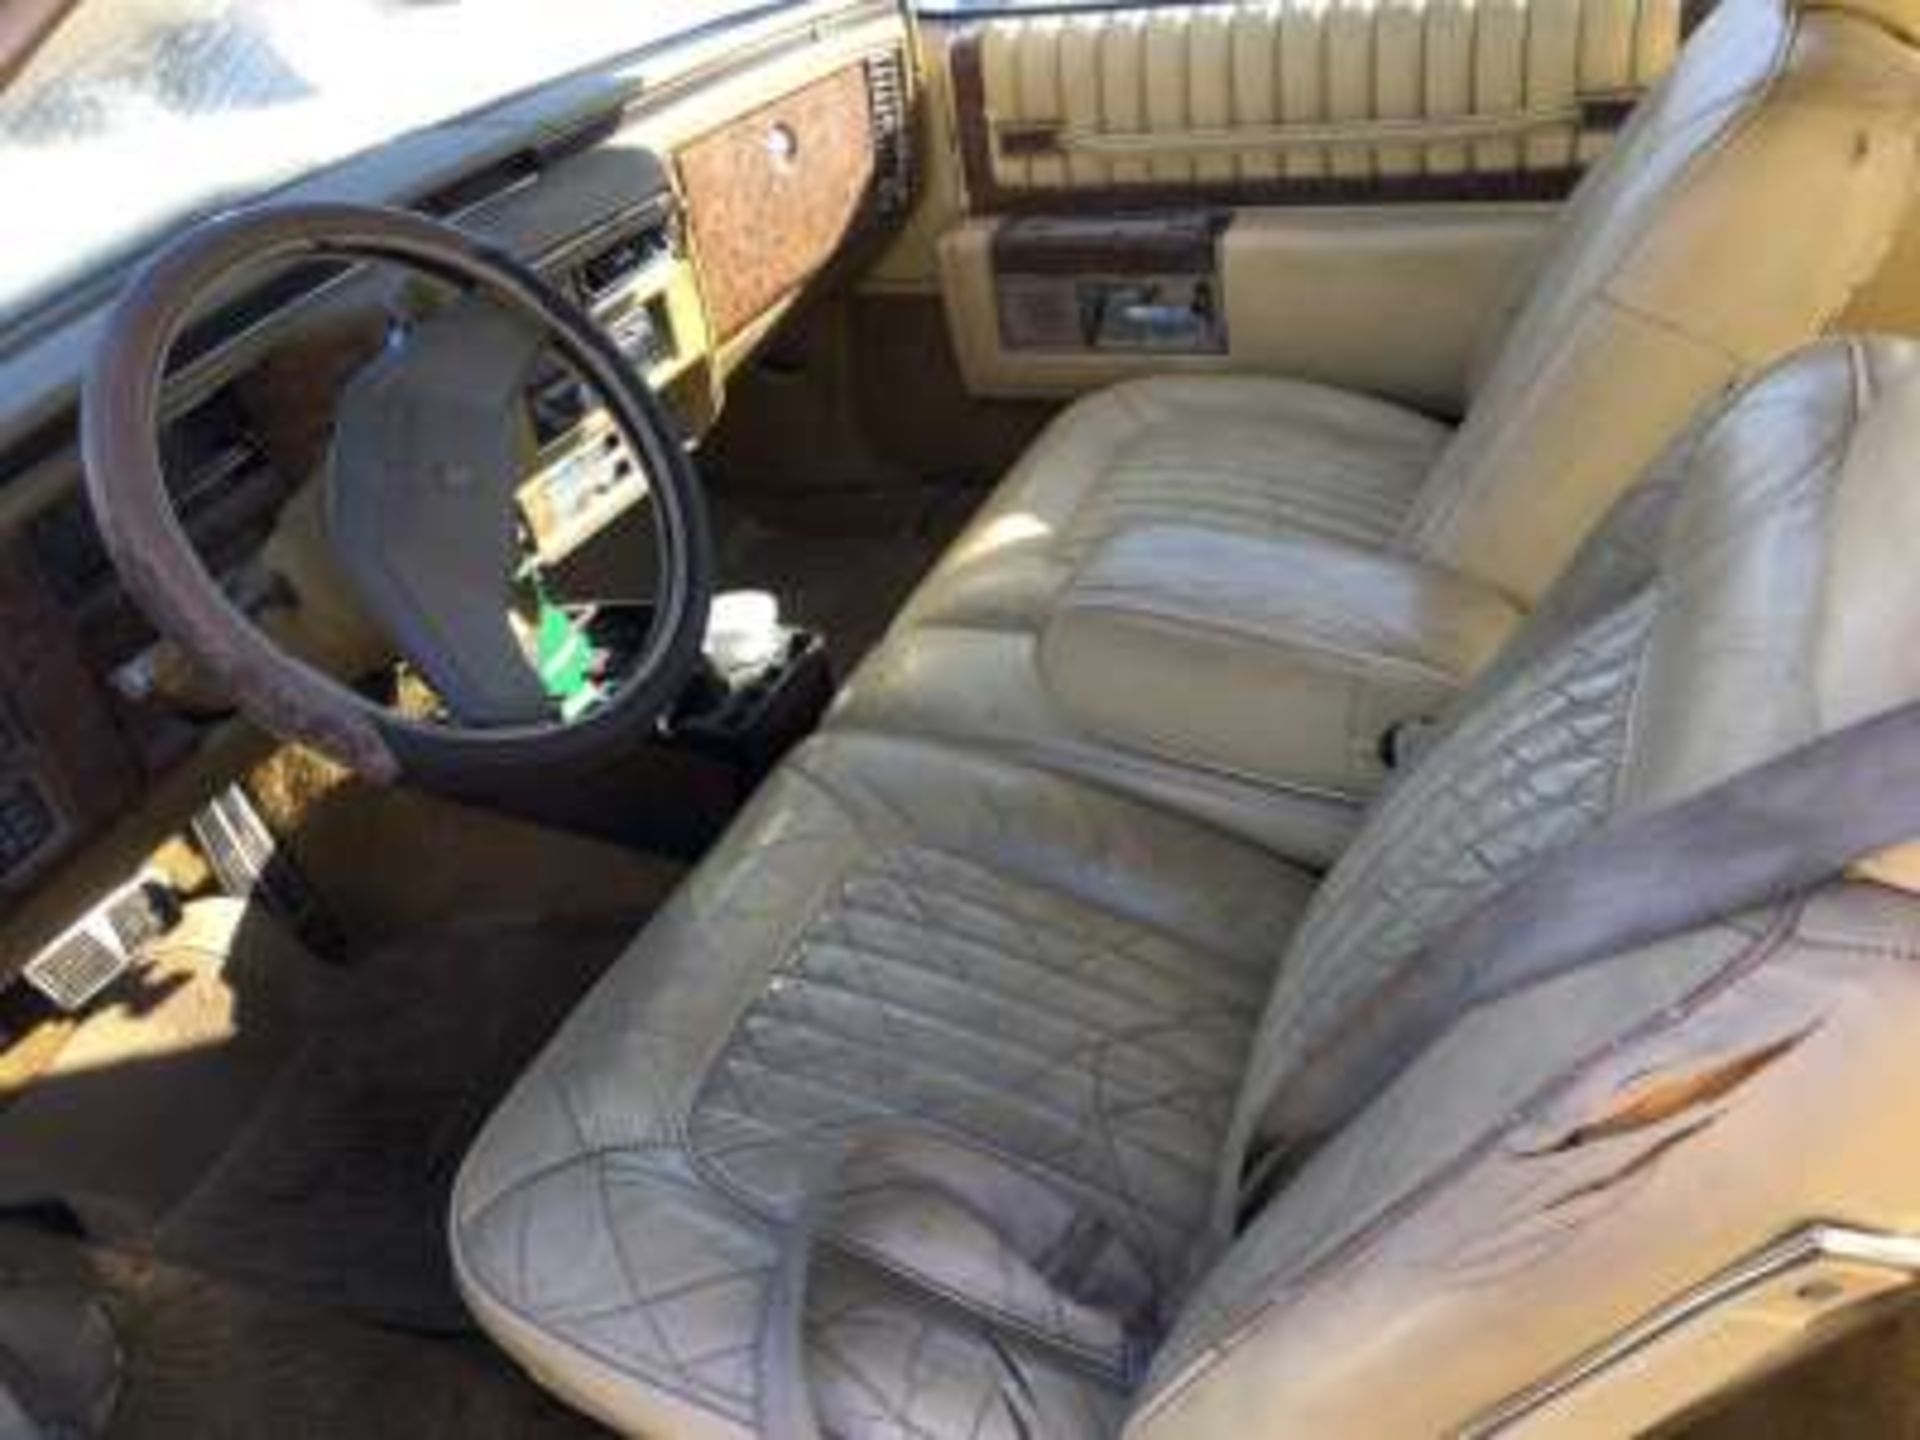 1979 Cadillac Coupe Deville, 2dr, 425 engine, no power steering, has power brakes, 113000mi., no - Image 3 of 4